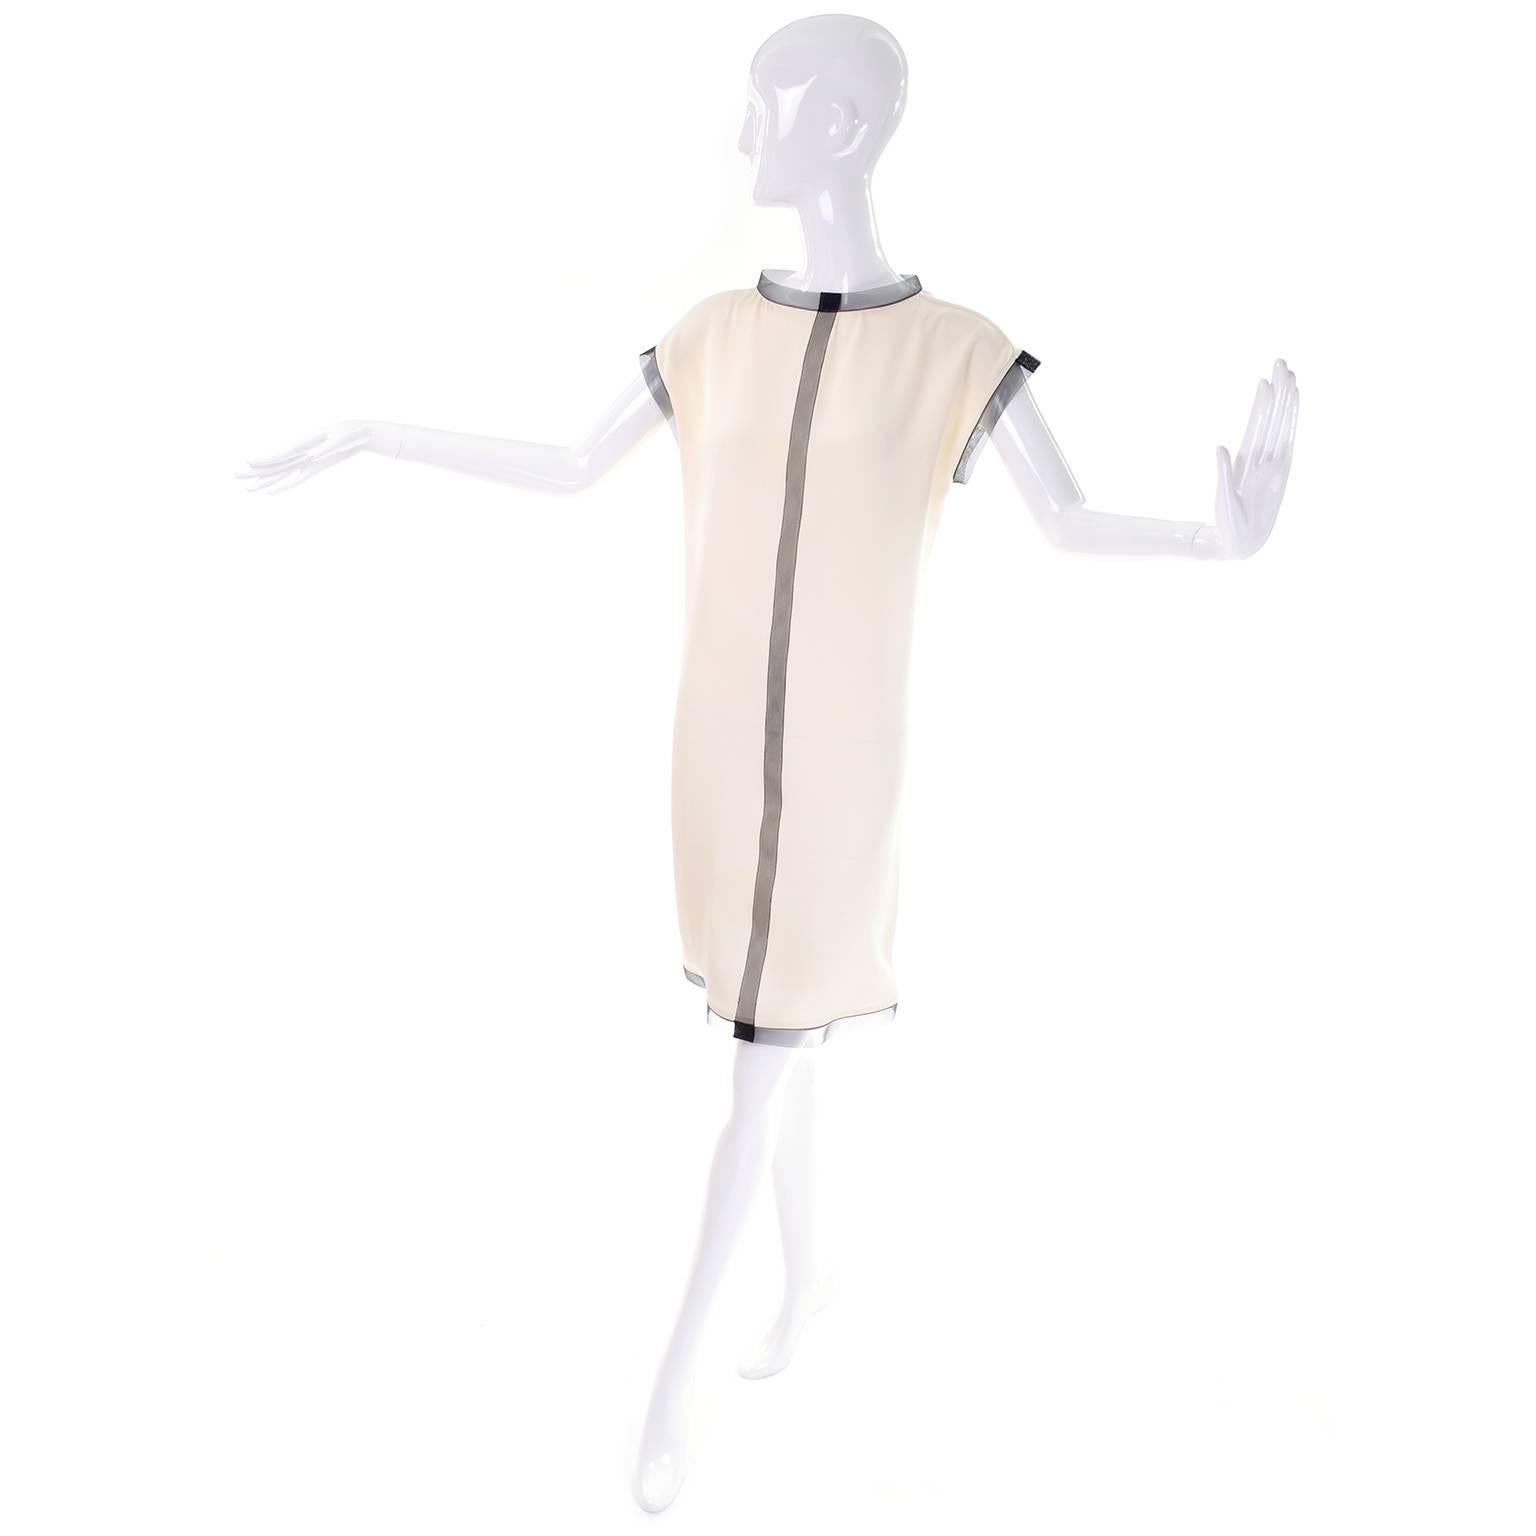 This beautiful vintage 1990's ensemble was designed by Geoffrey Beene in the 1990's. This outfit includes cream silk dress with black net trim, and a cream sheer mesh like coat with black net trim.  This outfit was purchased at Neiman Marcus and we